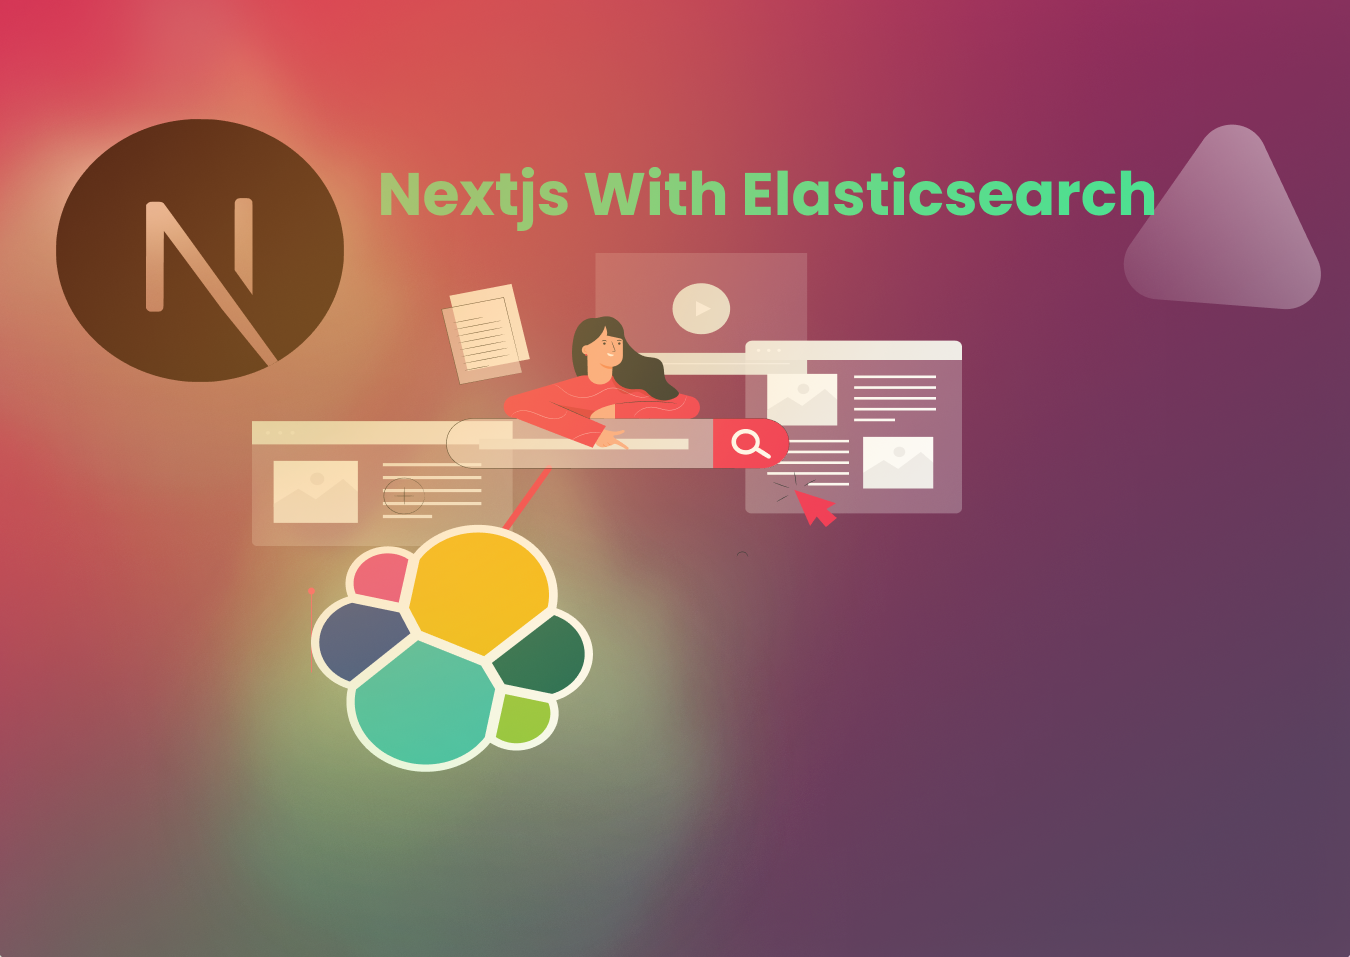 How to Integrate Elasticsearch With Next.js